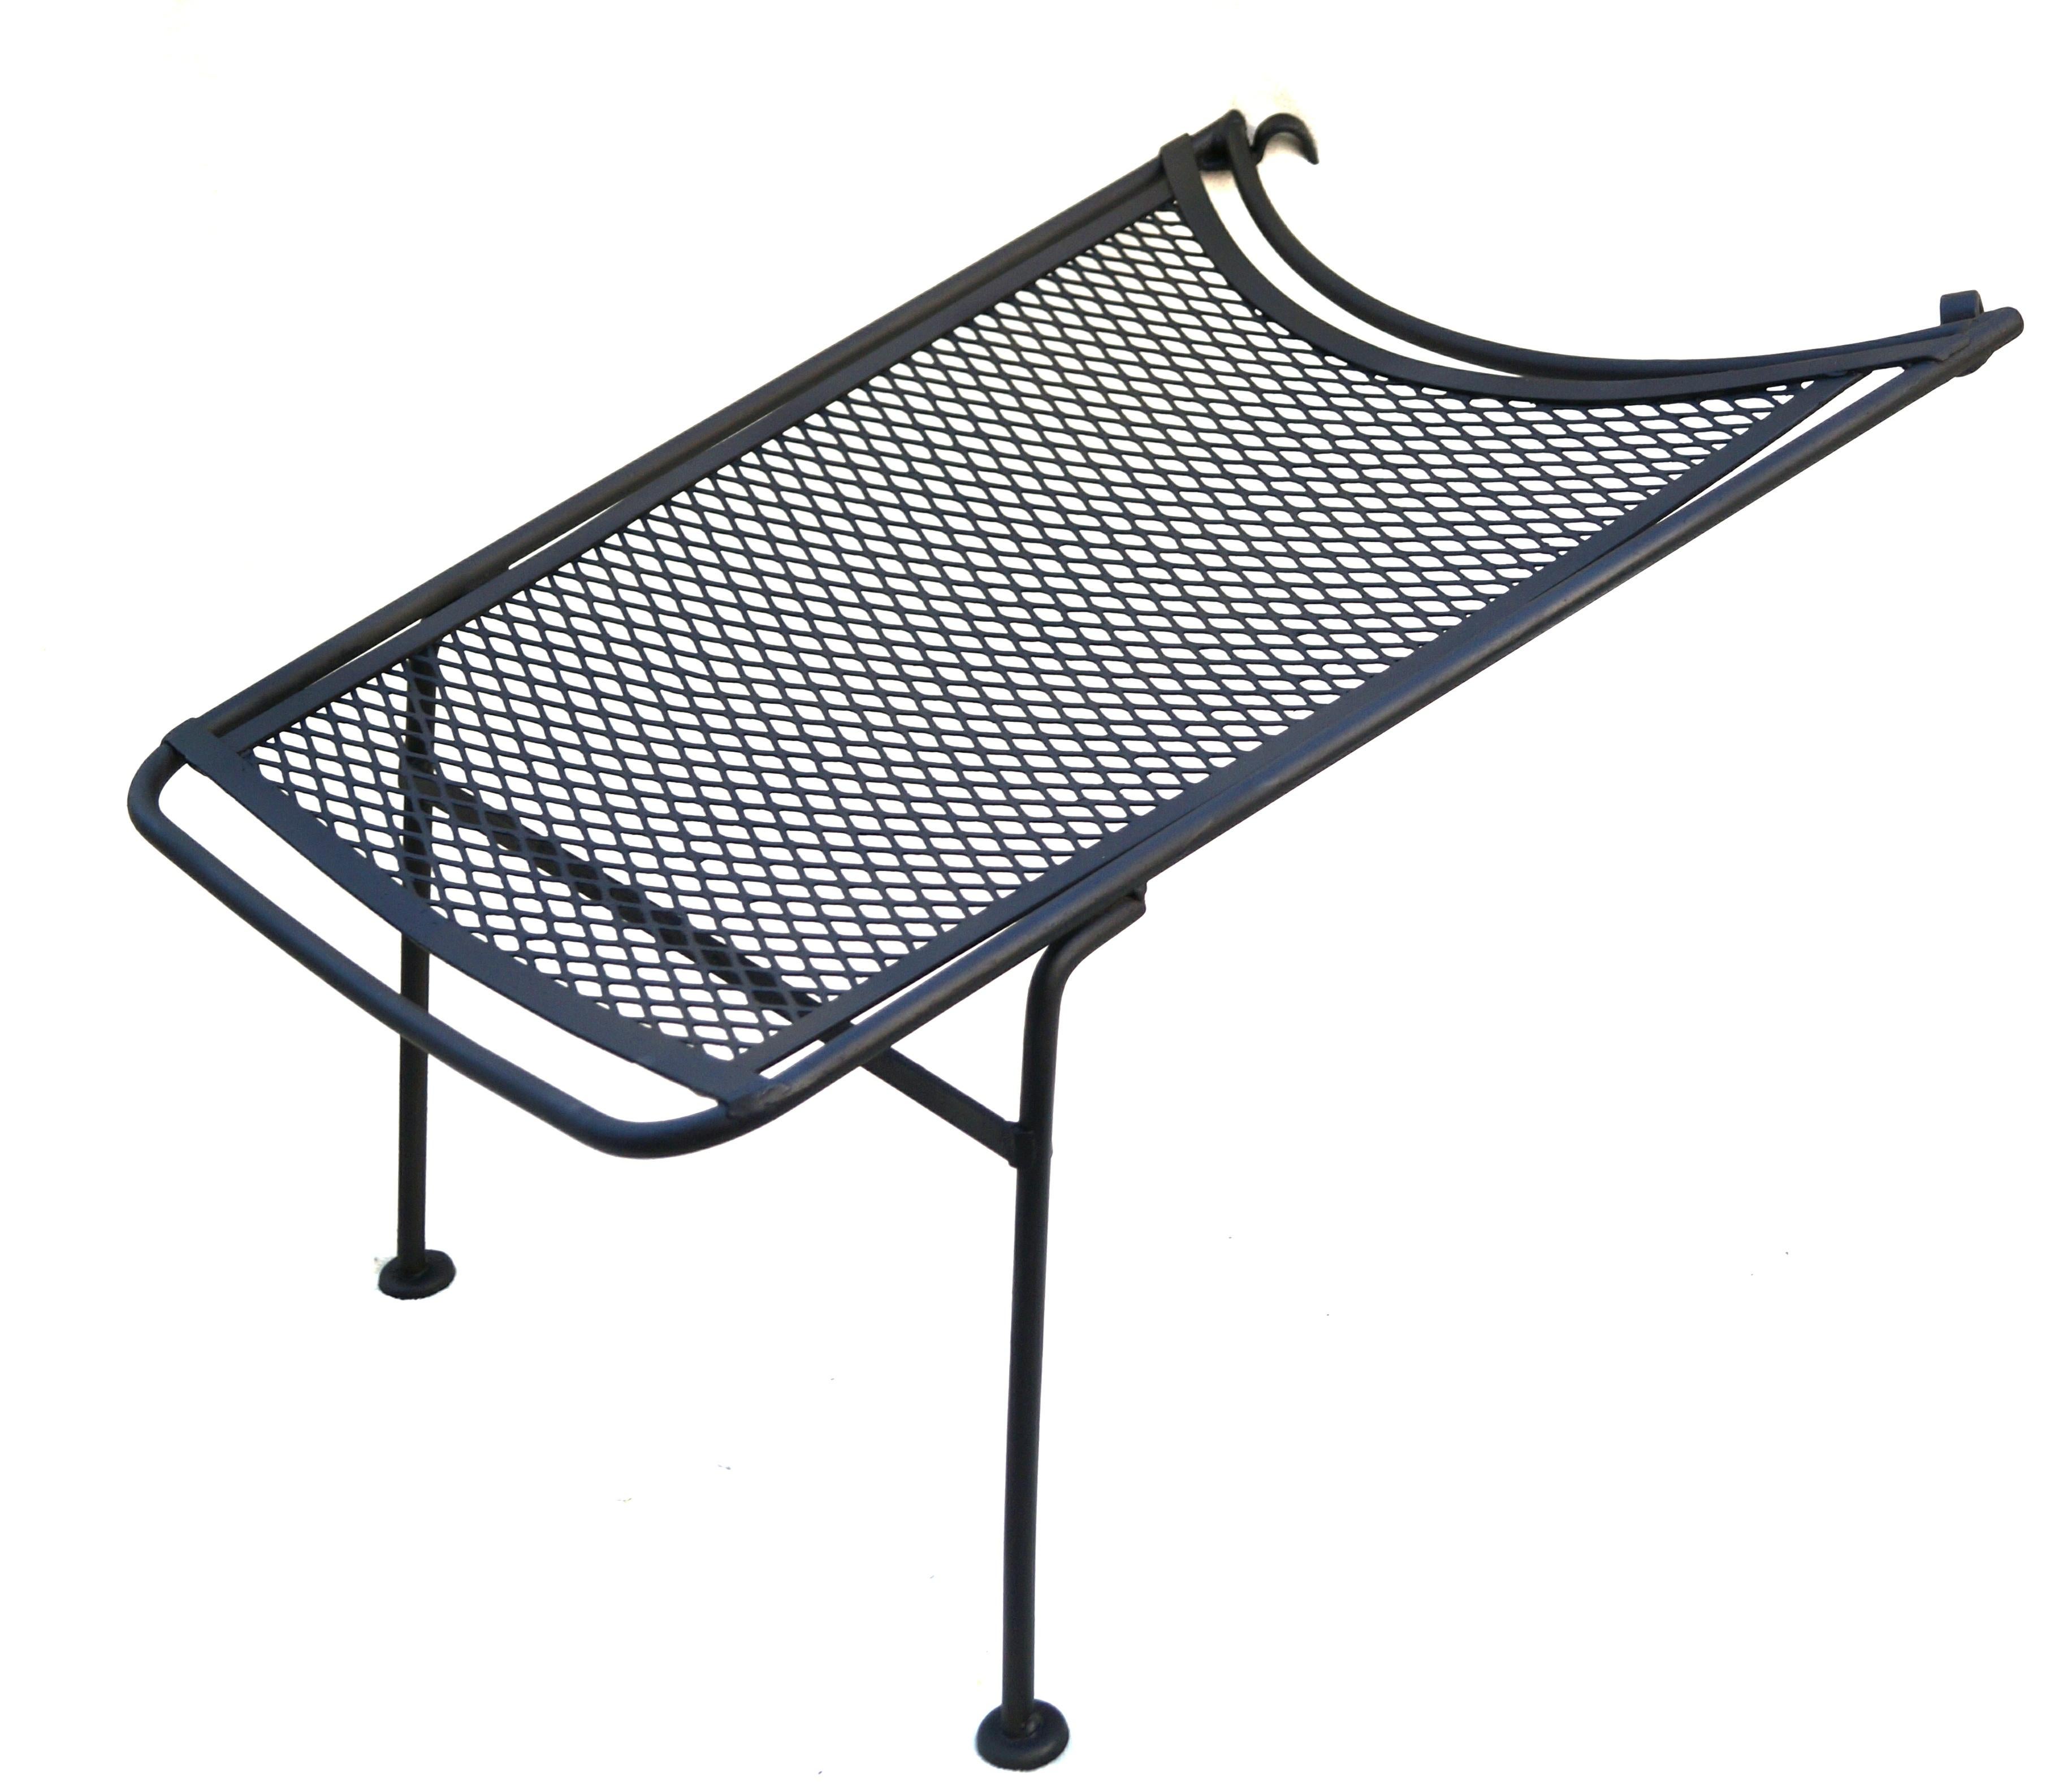 Black Cantilever Hoop Solar Ottoman Footrest by Tempestini Salterini .  Shown attached to a Chair, which is NOT included but have a pair in our other items . When attached to the chair shown, the front part is    11 3/8